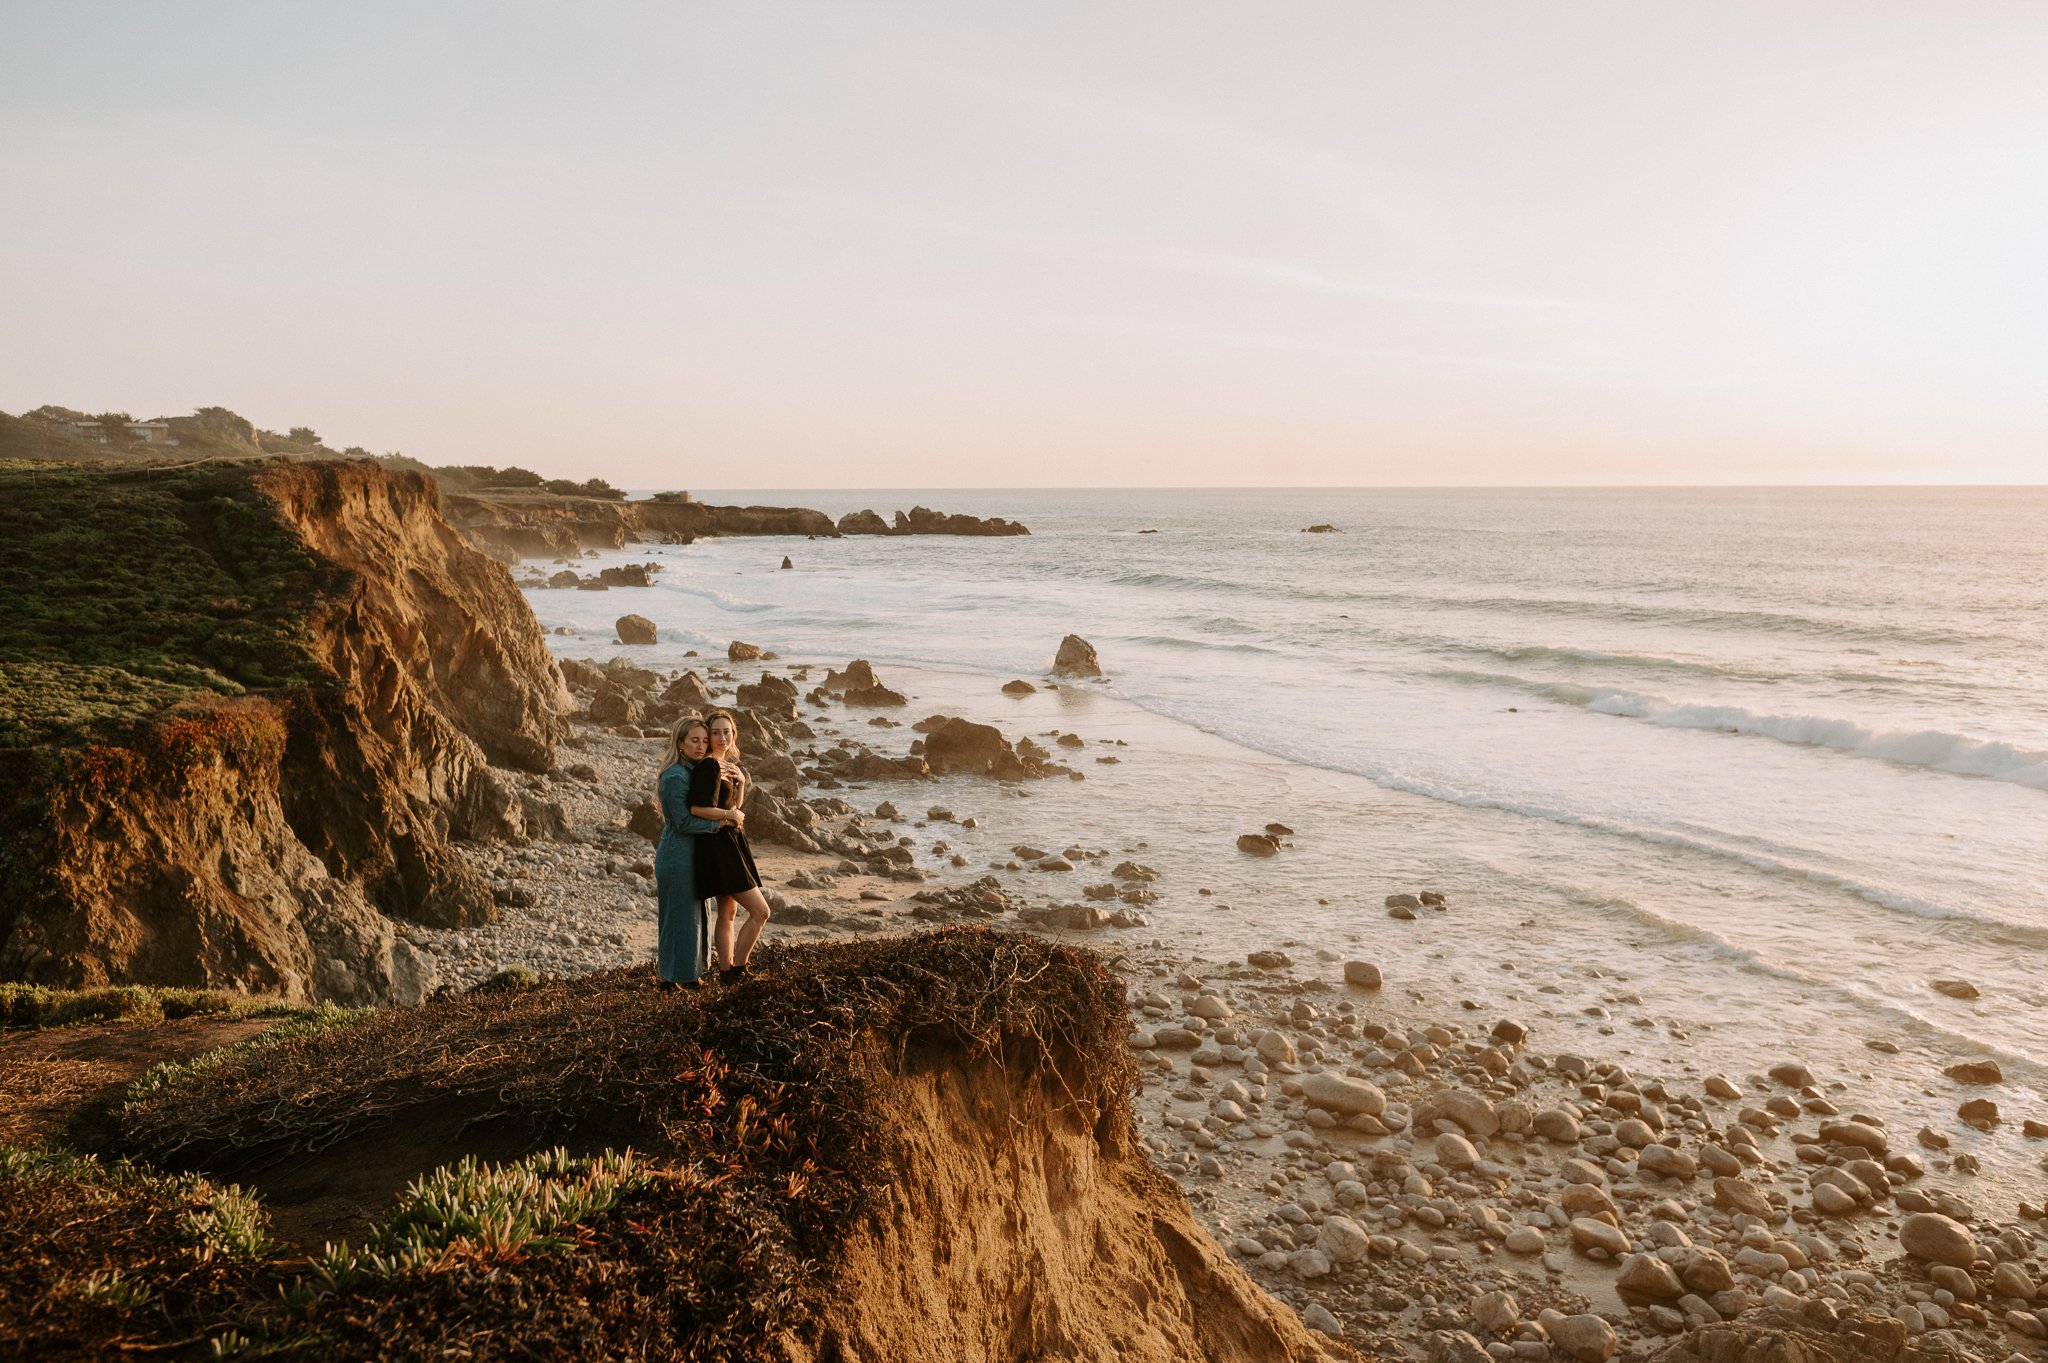  Newly engaged couple walking on cliffs overlooking Pacific Ocean in Big Sur, California 